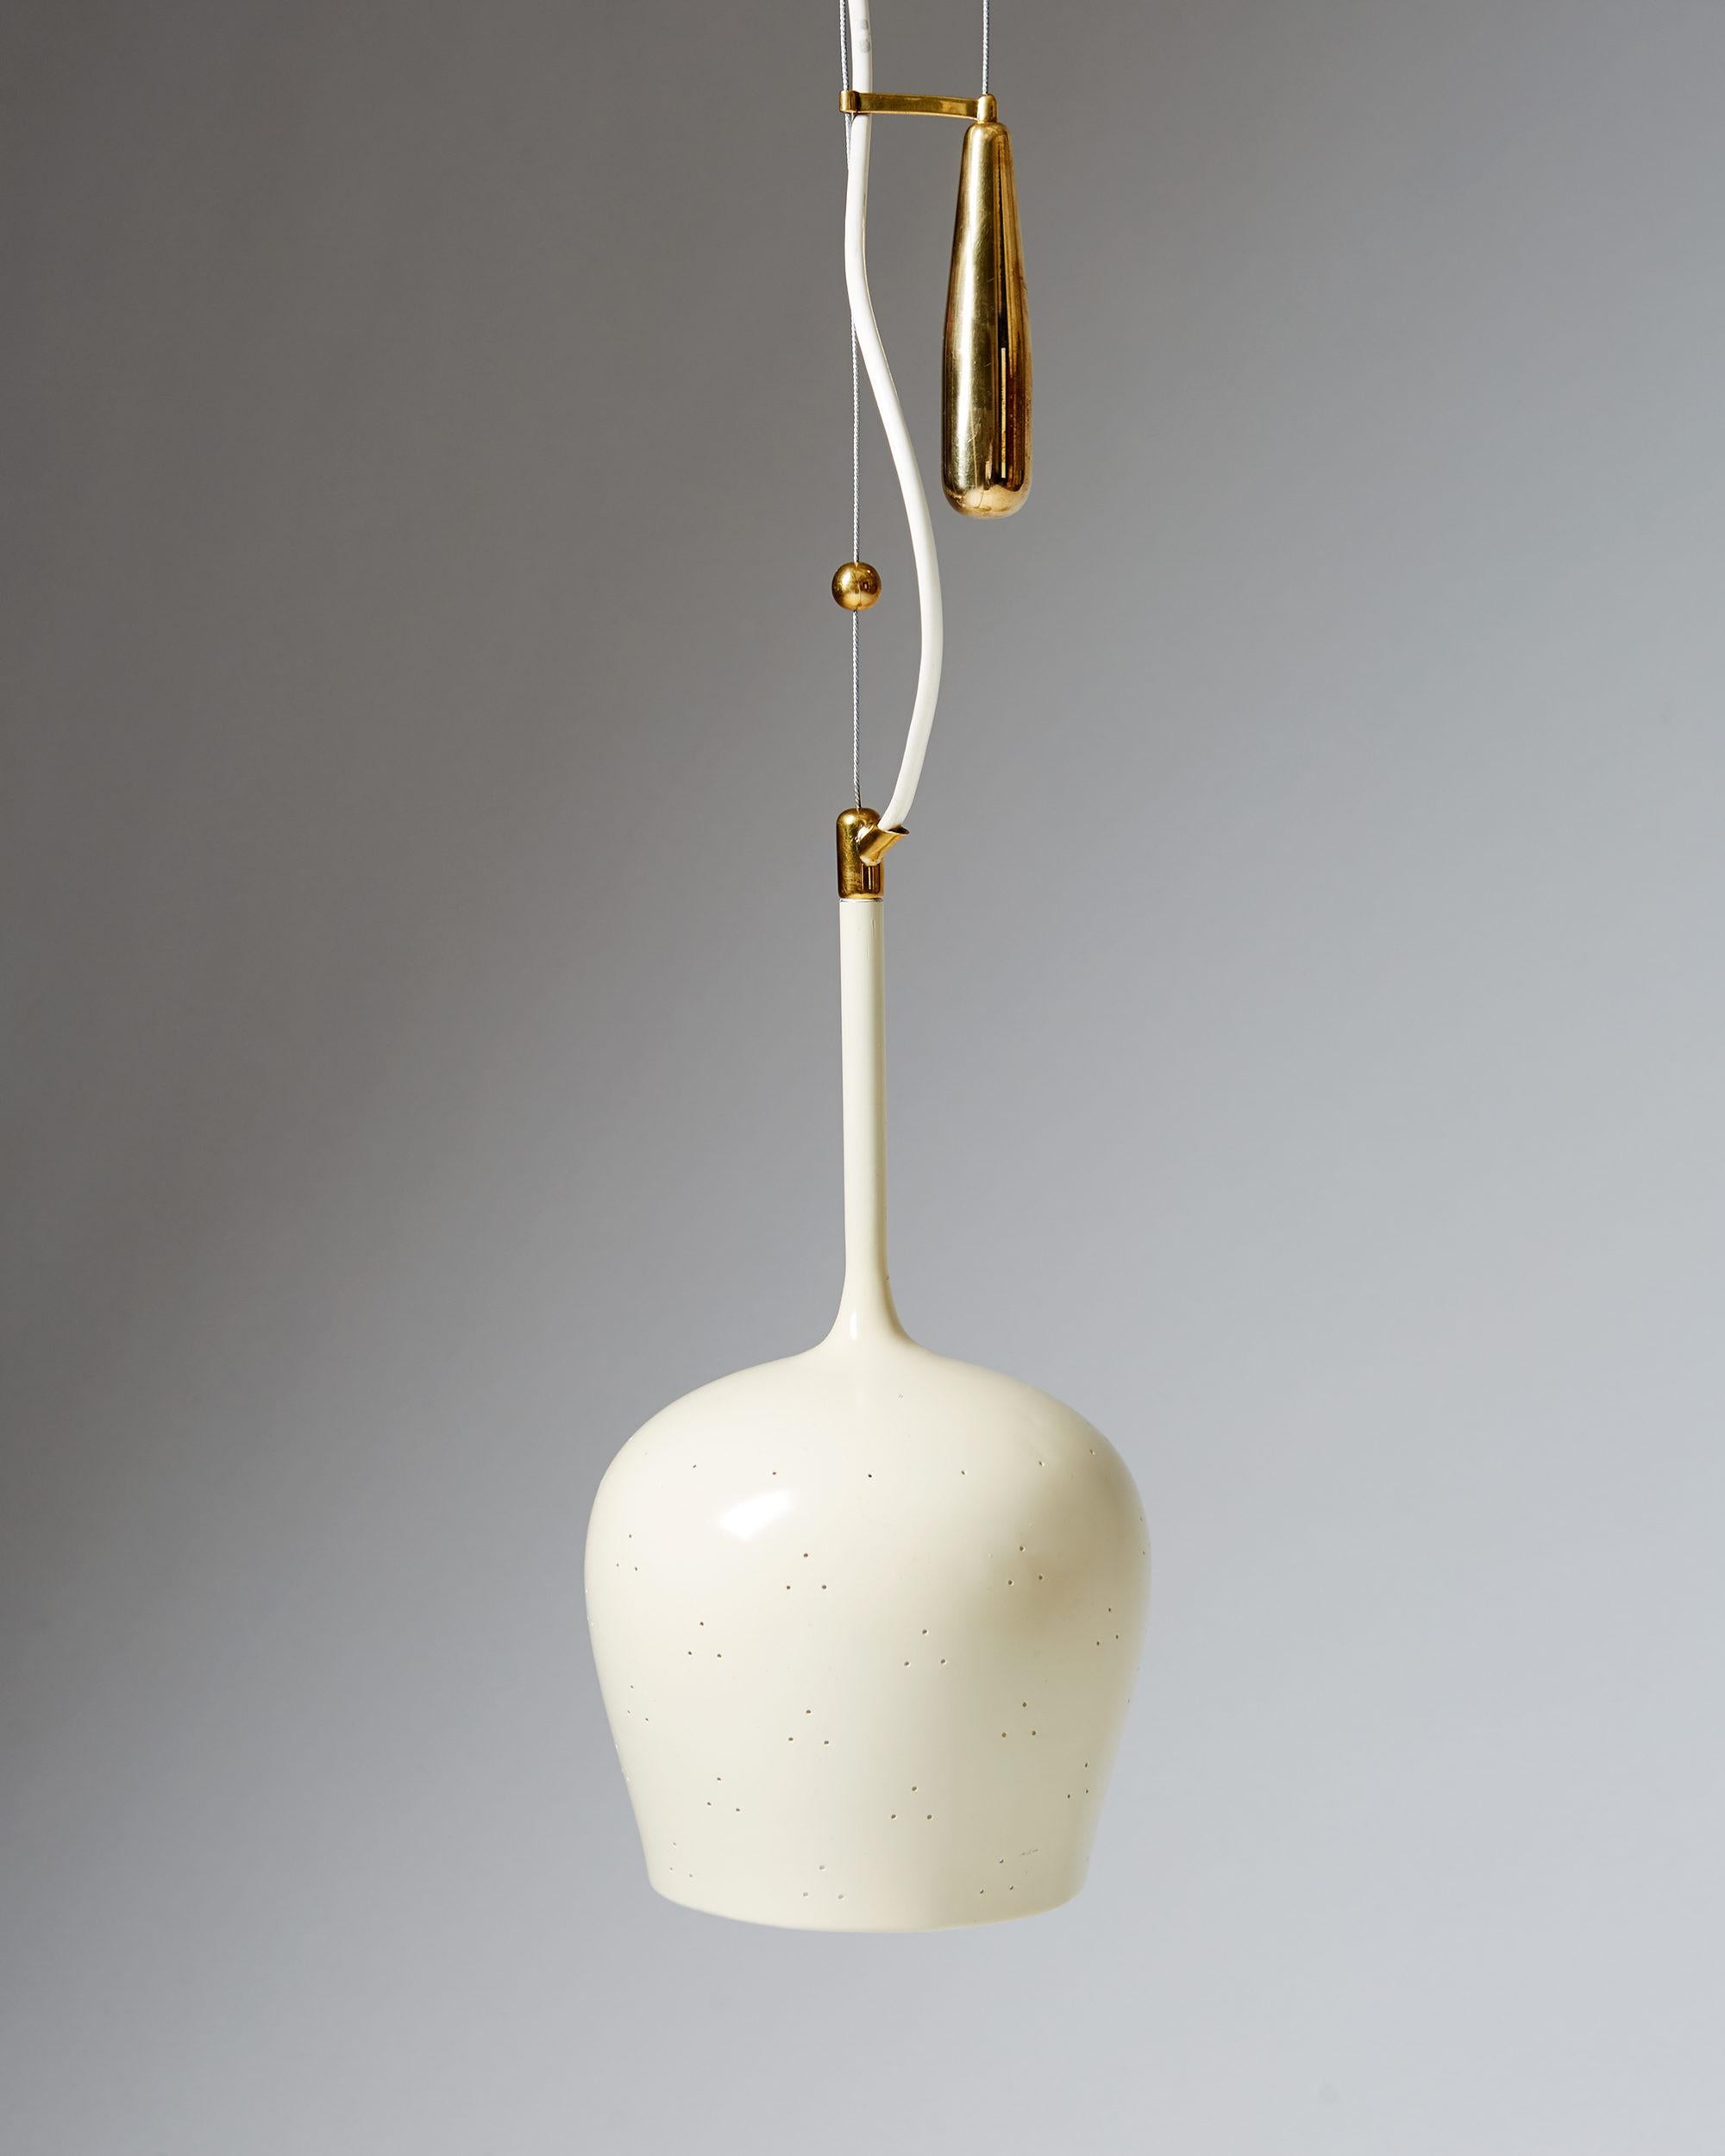 Scandinavian Modern Adjustable Ceiling Lamp Model A1957 Designed by Paavo Tynell for Idman, Finland